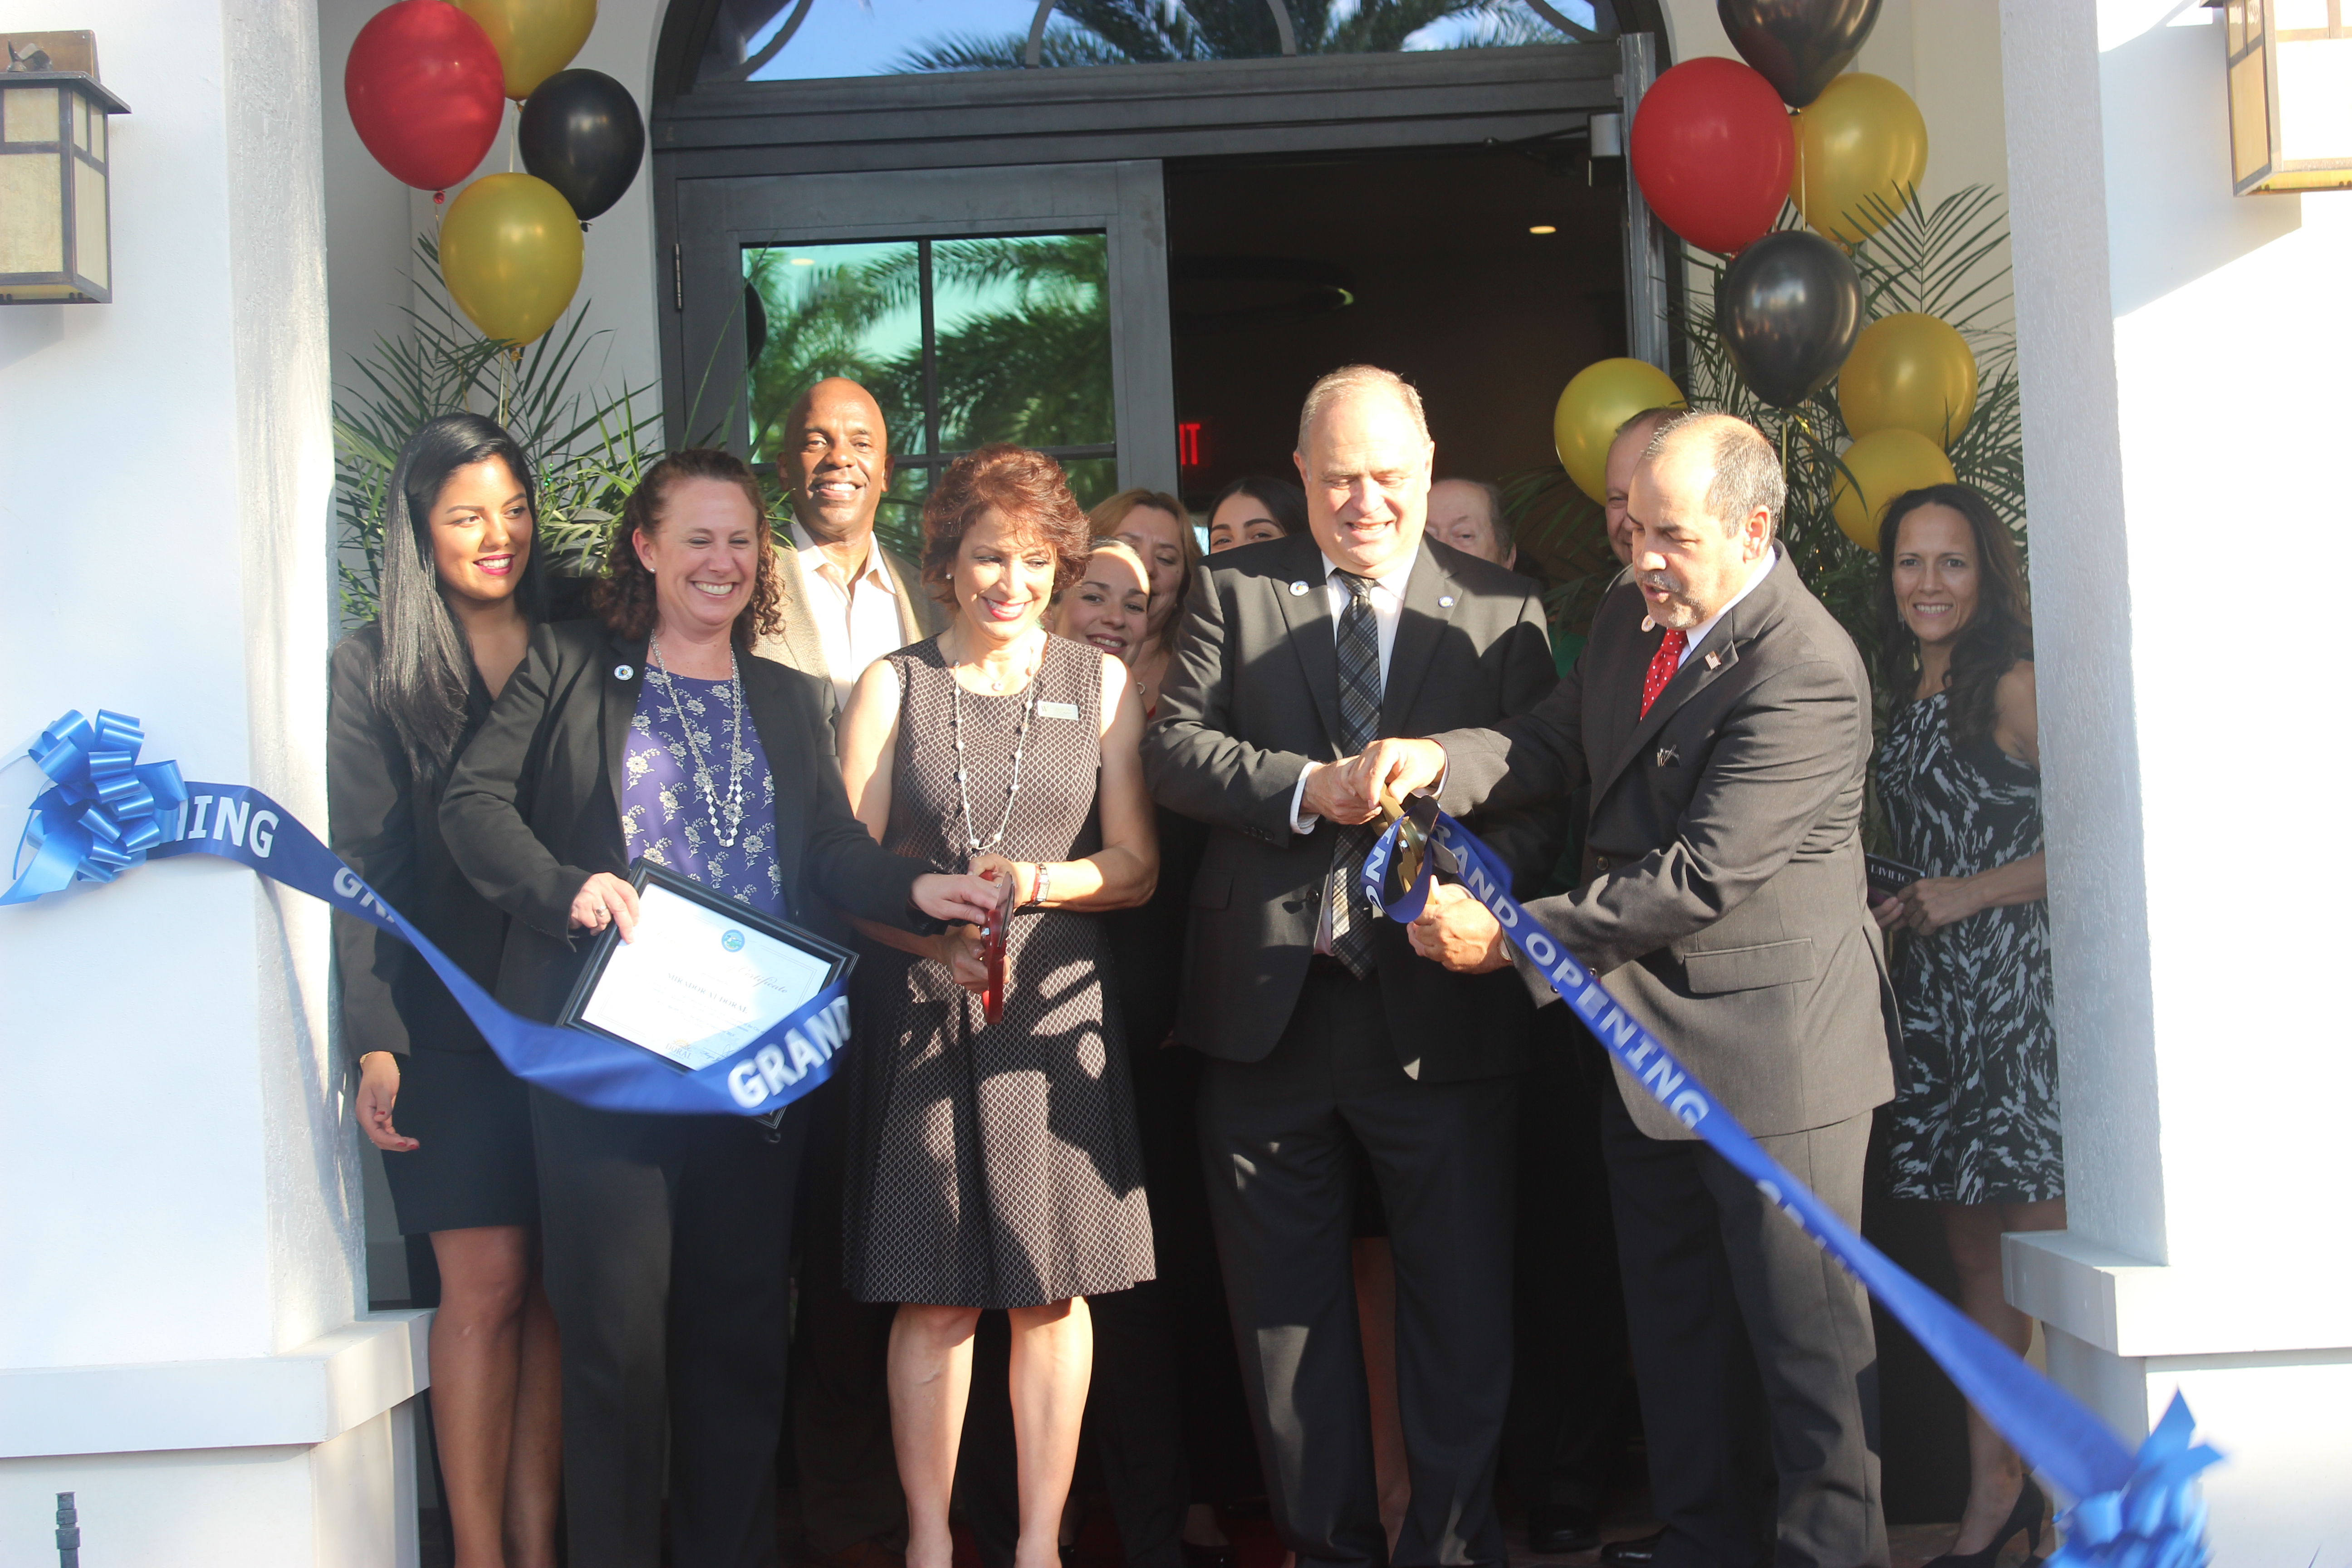 Ribbon cutting at Mirador Apartments Grand Opening hosted by the Doral Chamber of Commerce.